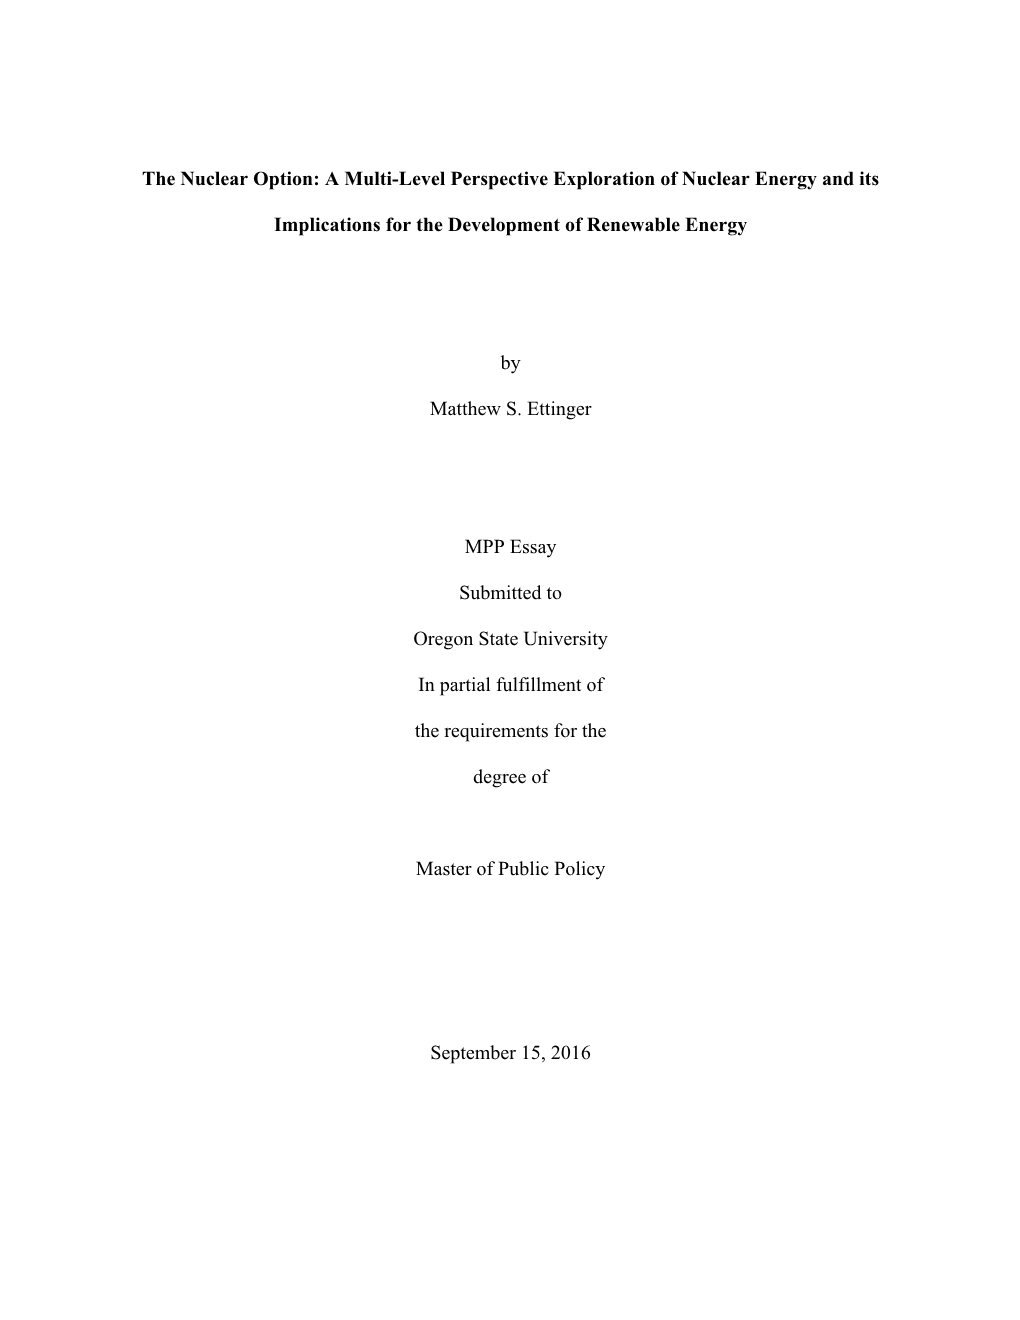 A Multi-Level Perspective Exploration of Nuclear Energy and Its